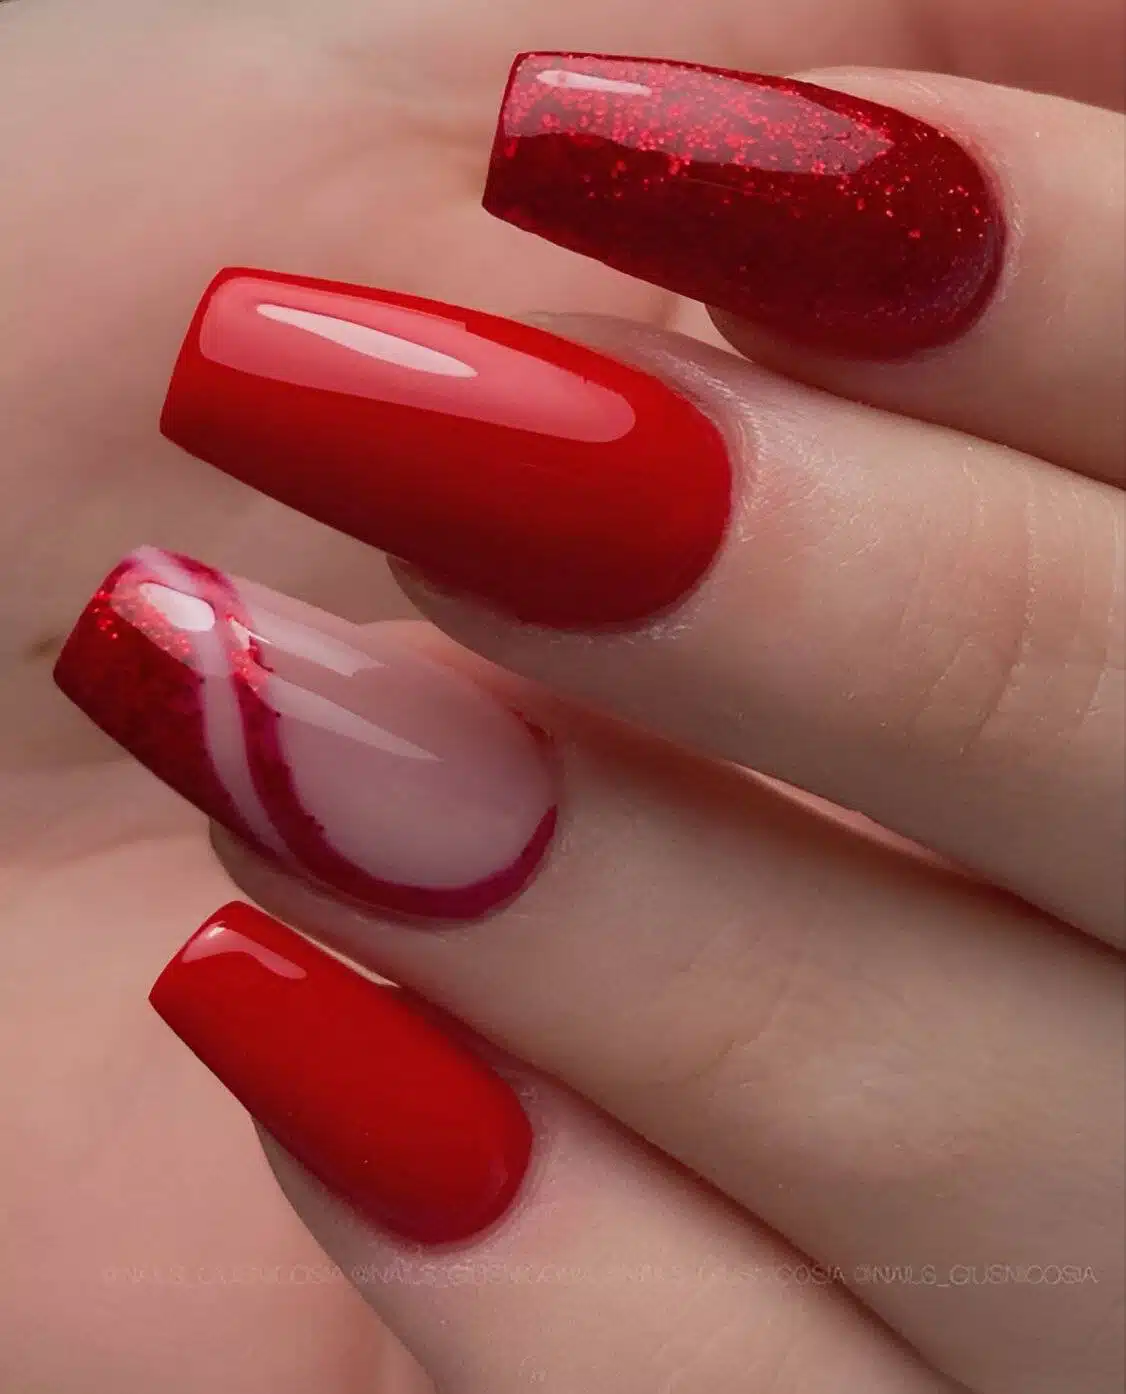 30 Red Nail Designs That Are The Epitome Of Feminine Beauty - 251